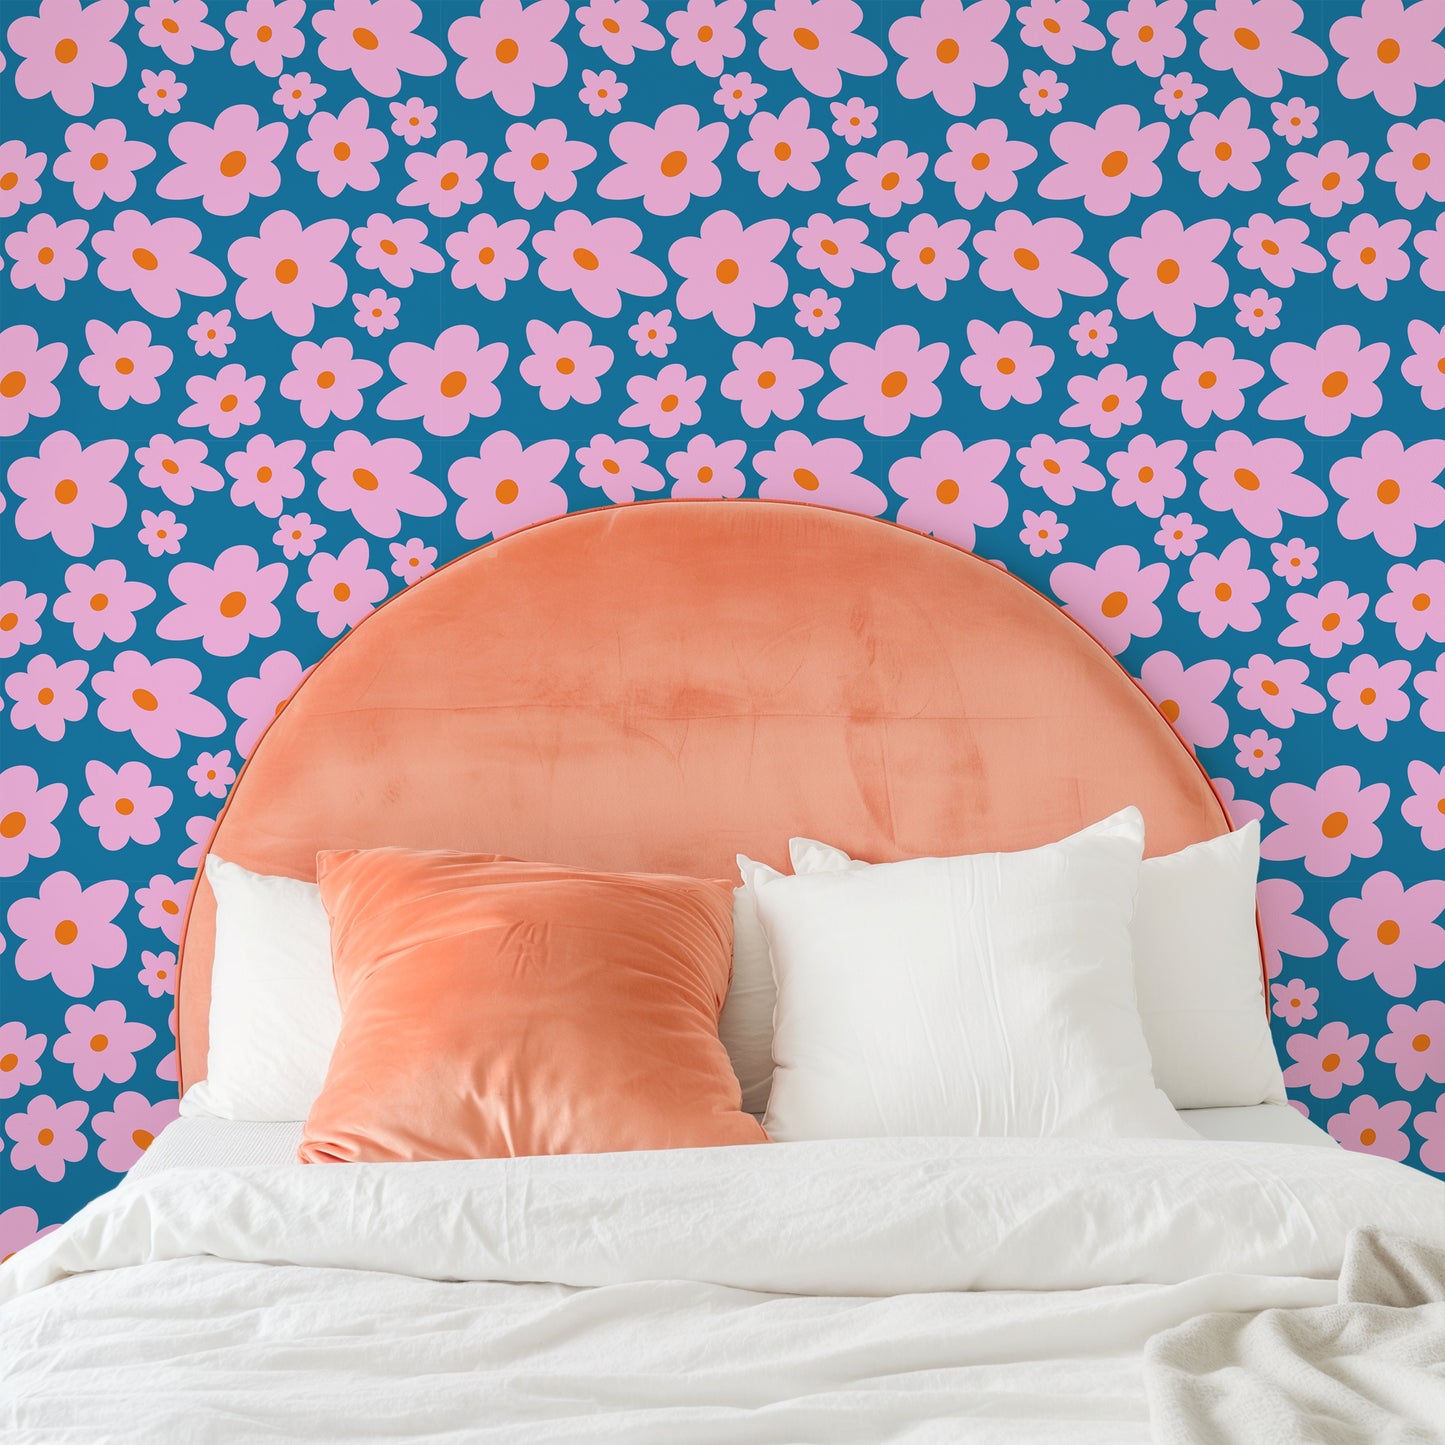 Daisy wallpaper in turquoise blue, pink and orange, uk floral wallpaper, printed sustainably